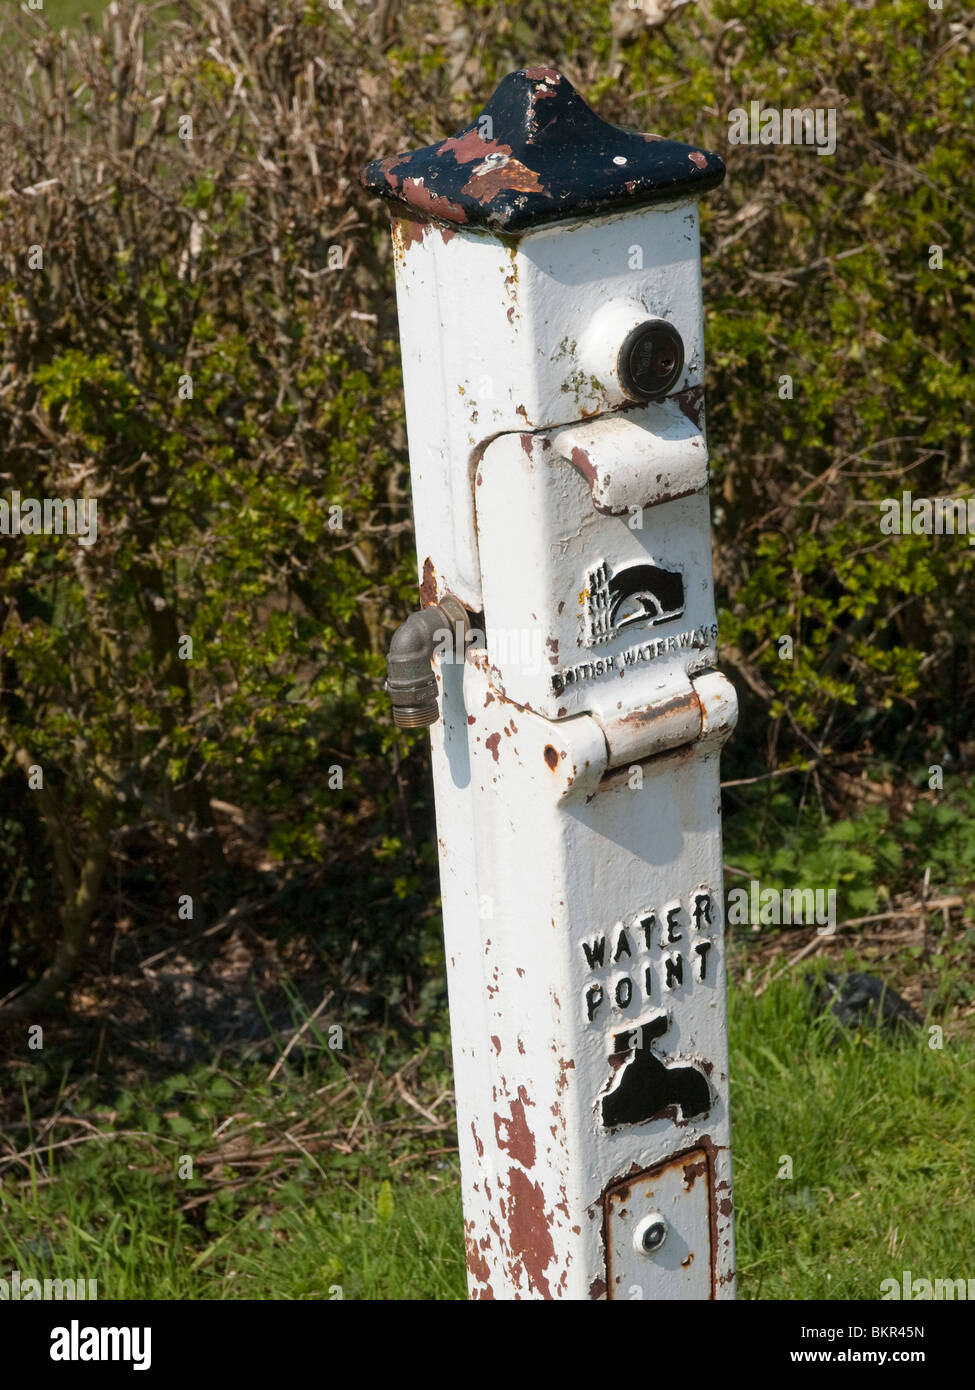 A water point at Foxton Locks, Leicestershire England UK Stock Photo